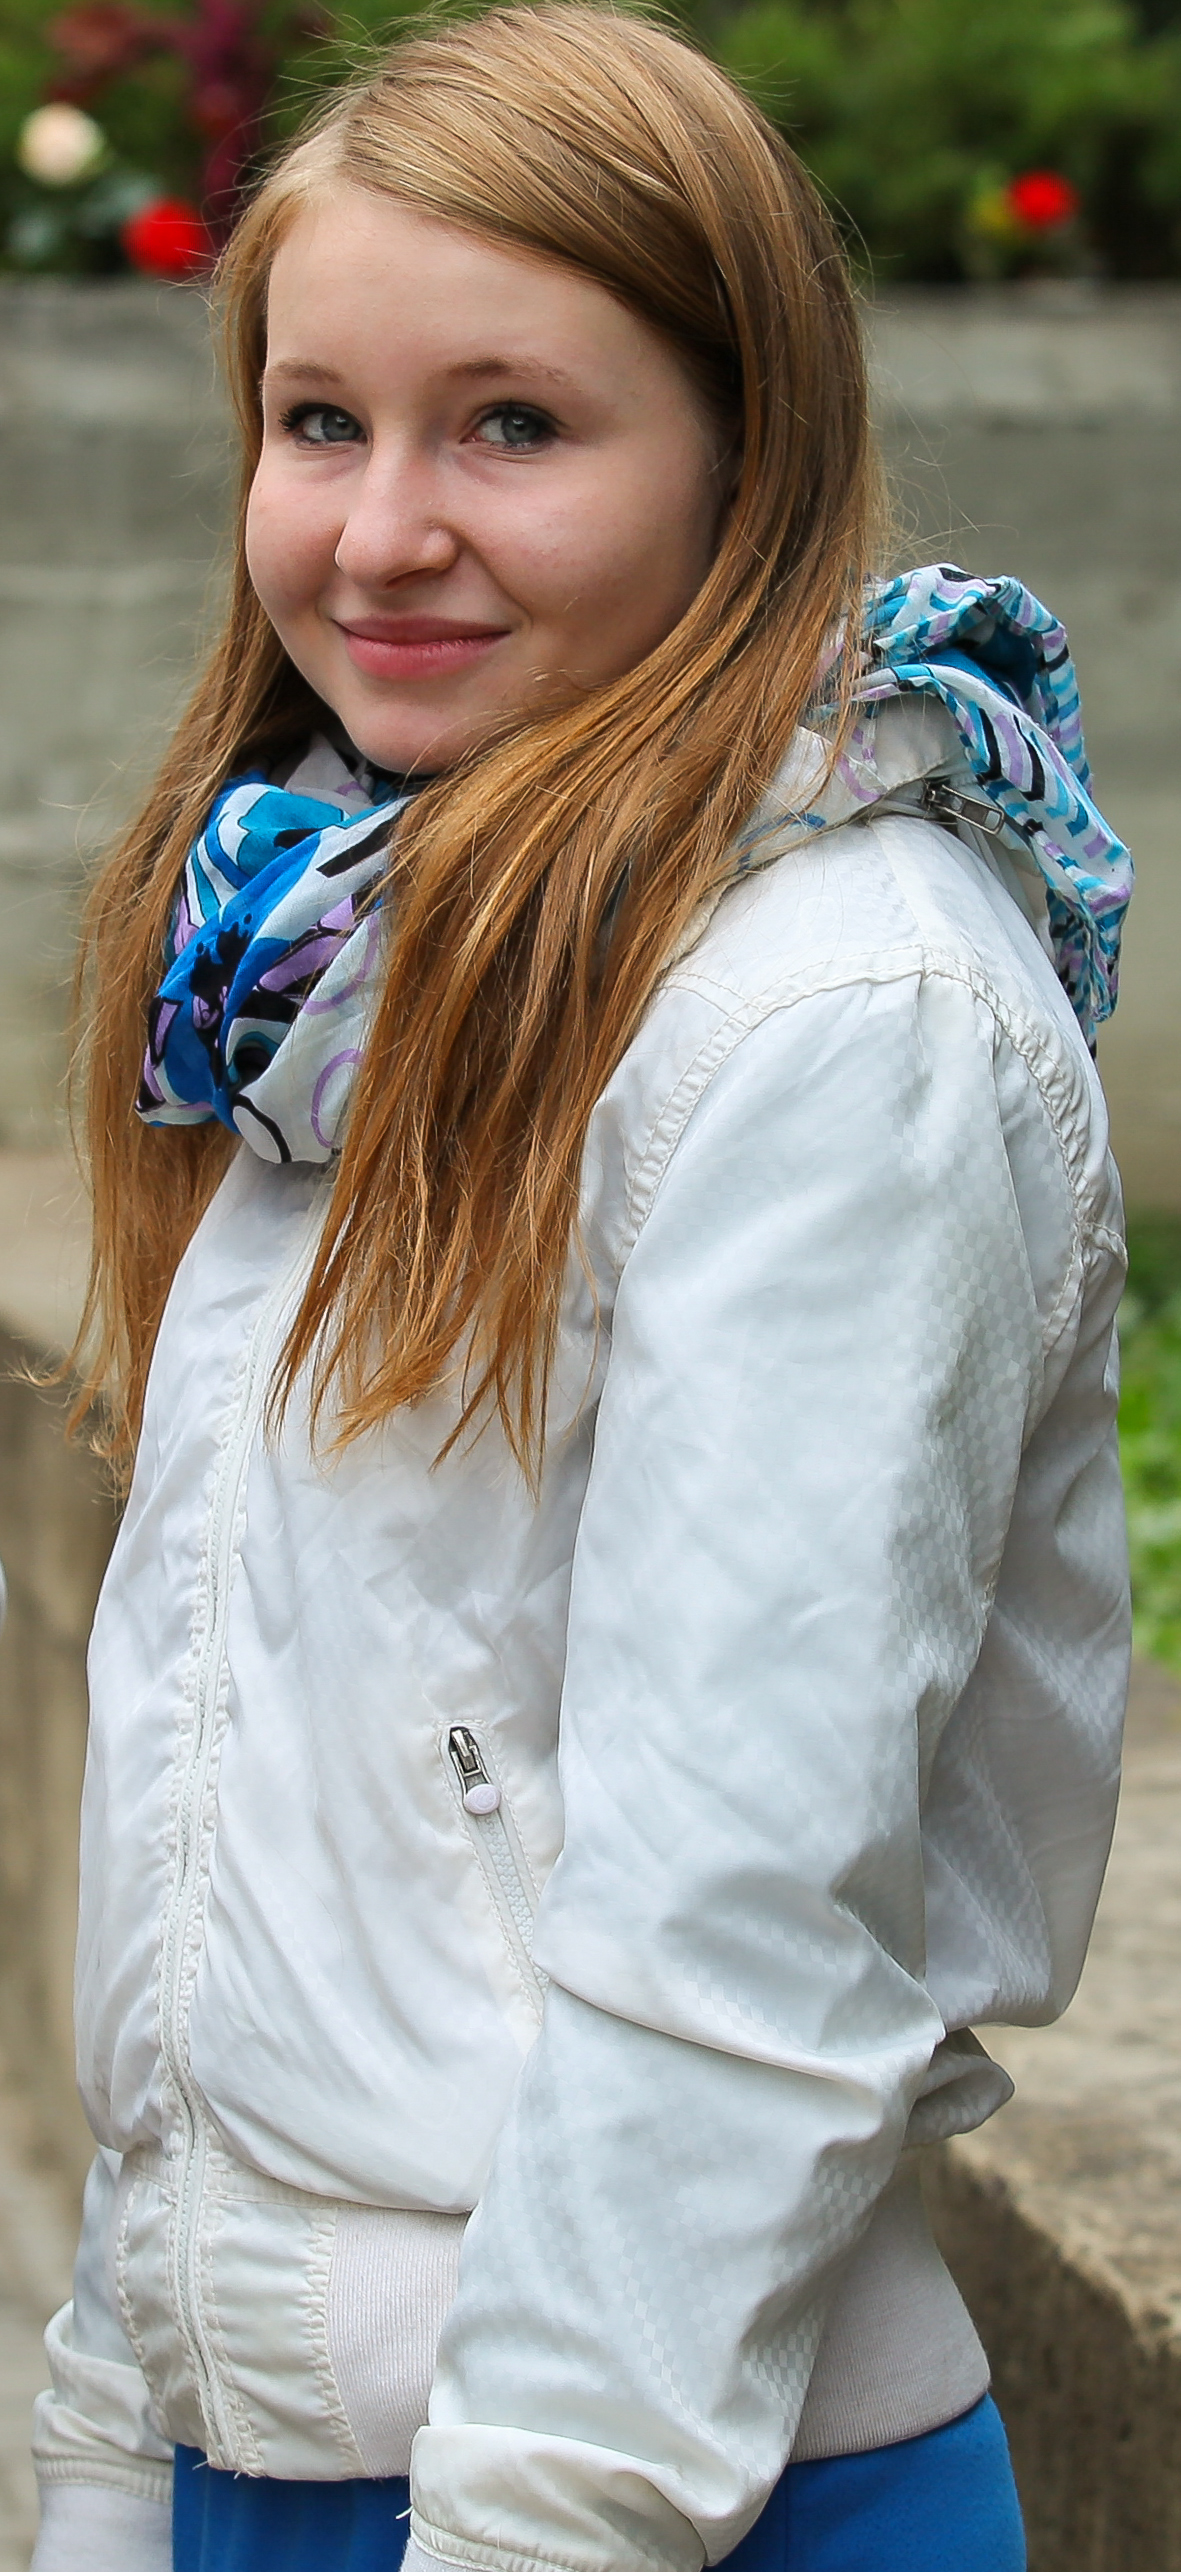 a cute blond girl near a Catholic church photographed in September 2013, picture 2/6